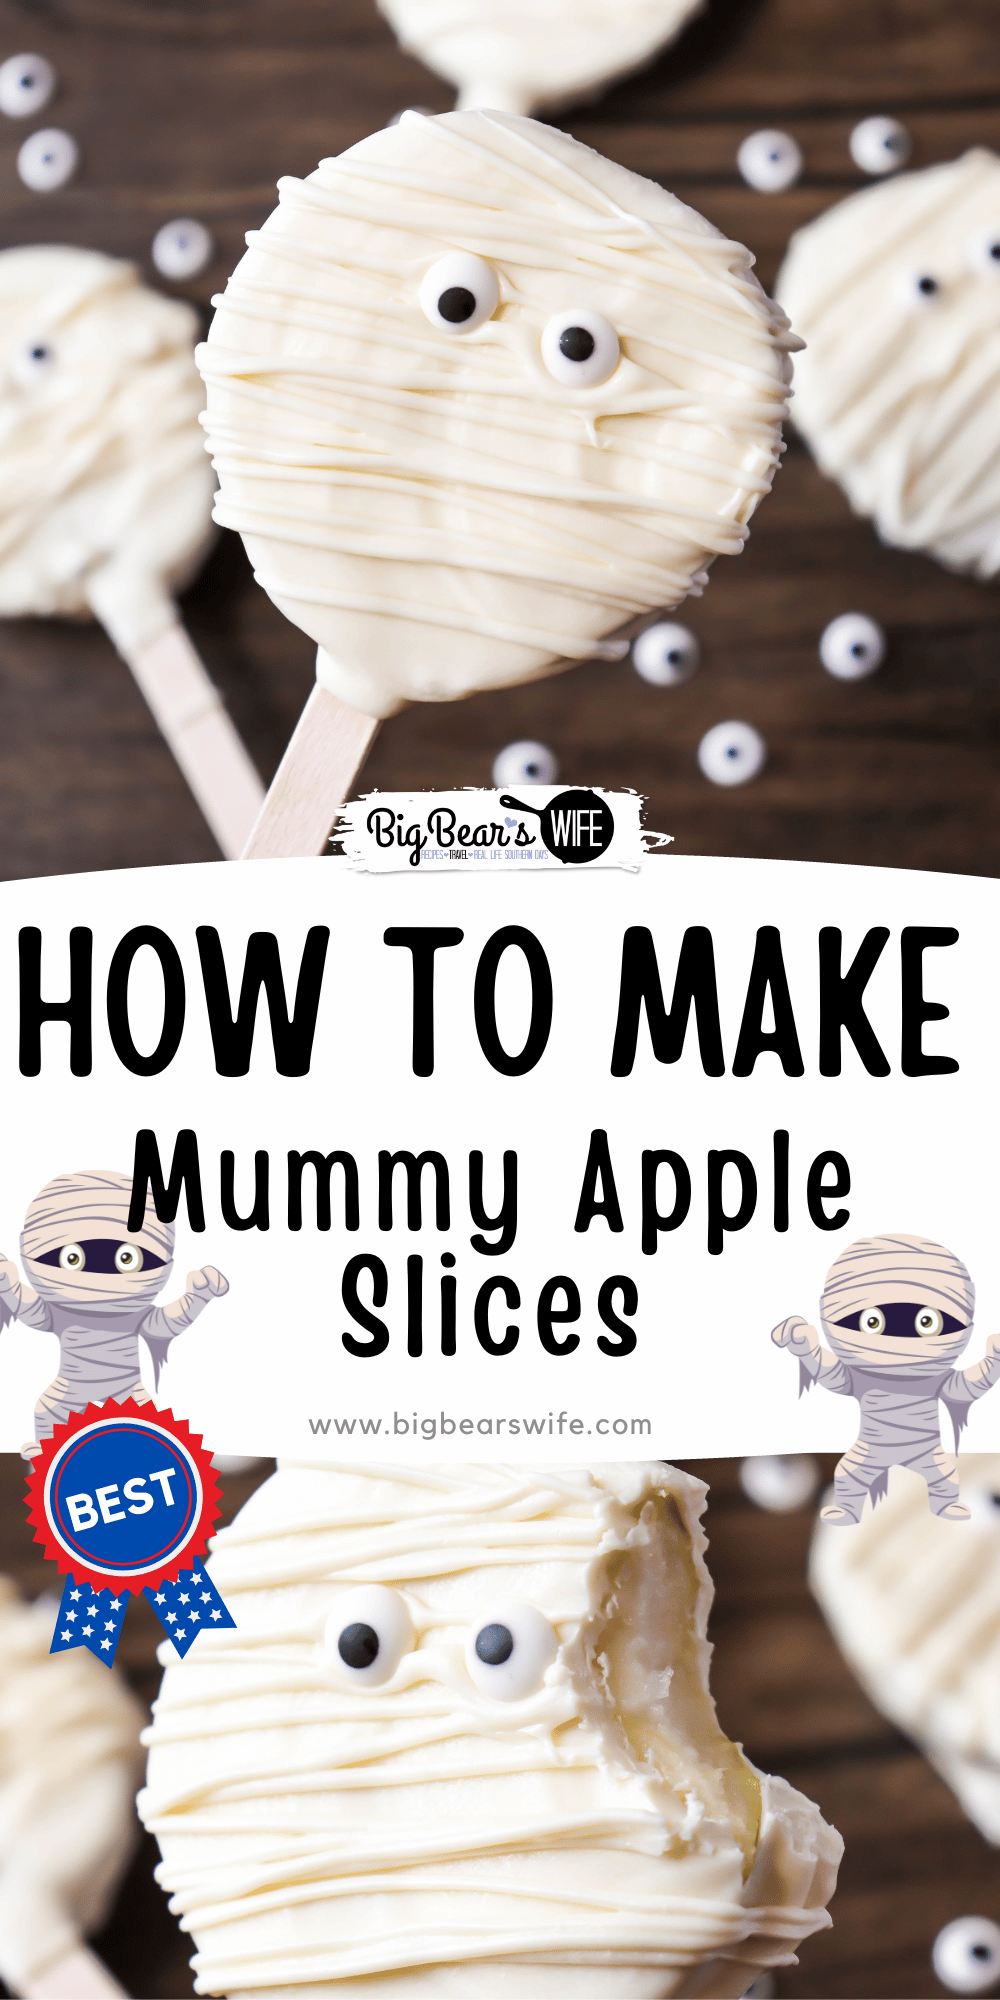 An easy Halloween dessert, these Mummy Apple Slices use slices of apples instead of the entire apple so you get more servings per apple! via @bigbearswife